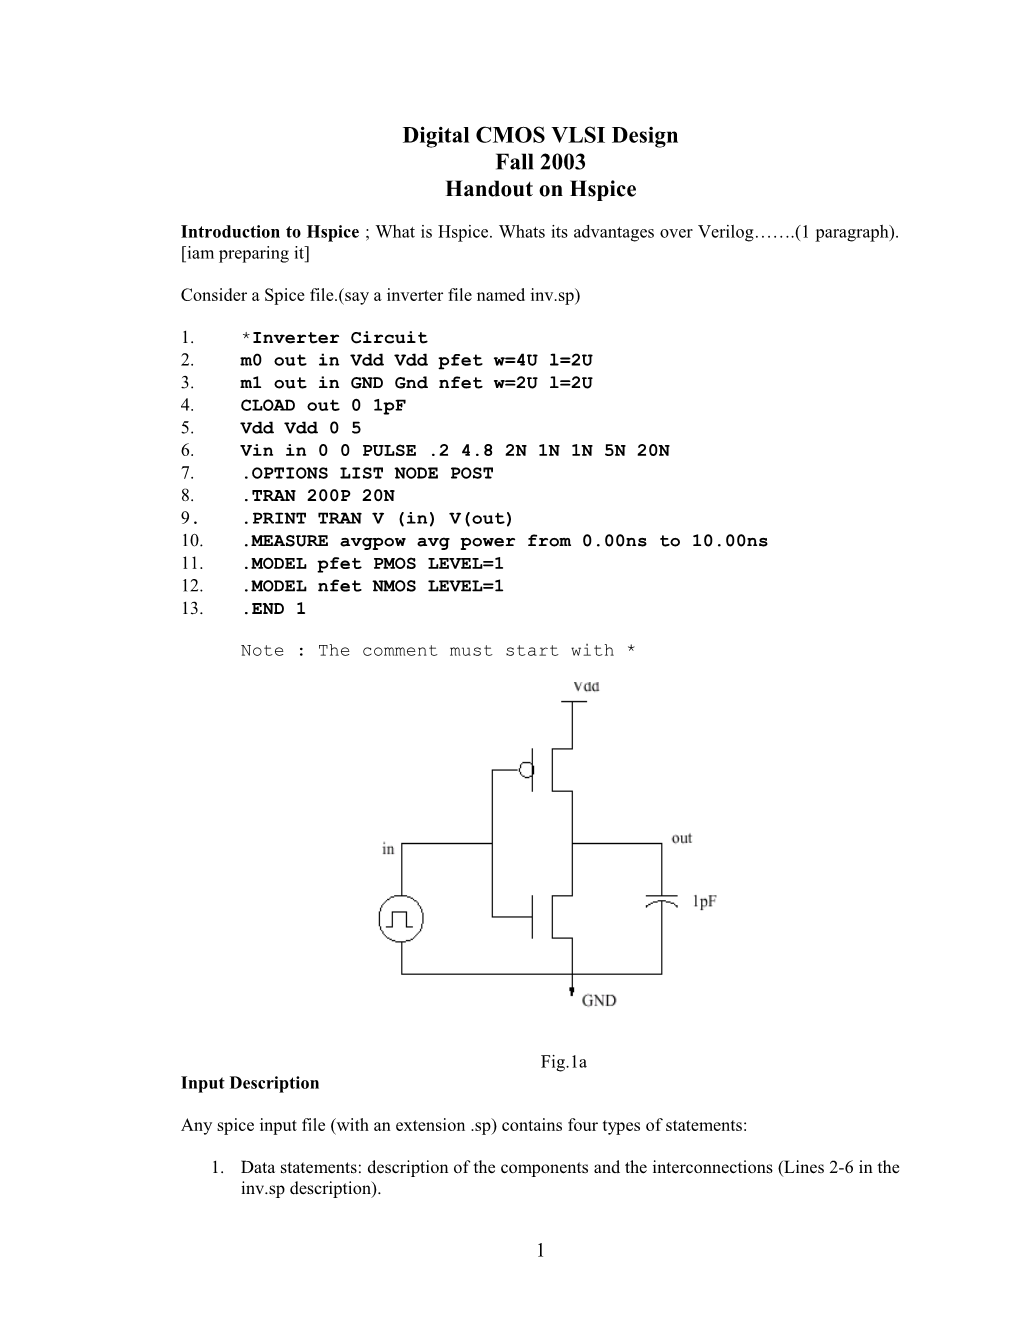 SPICE (Simulation Program for Integrated Circuits Emphasis) Is a Powerful Circuit Simulator